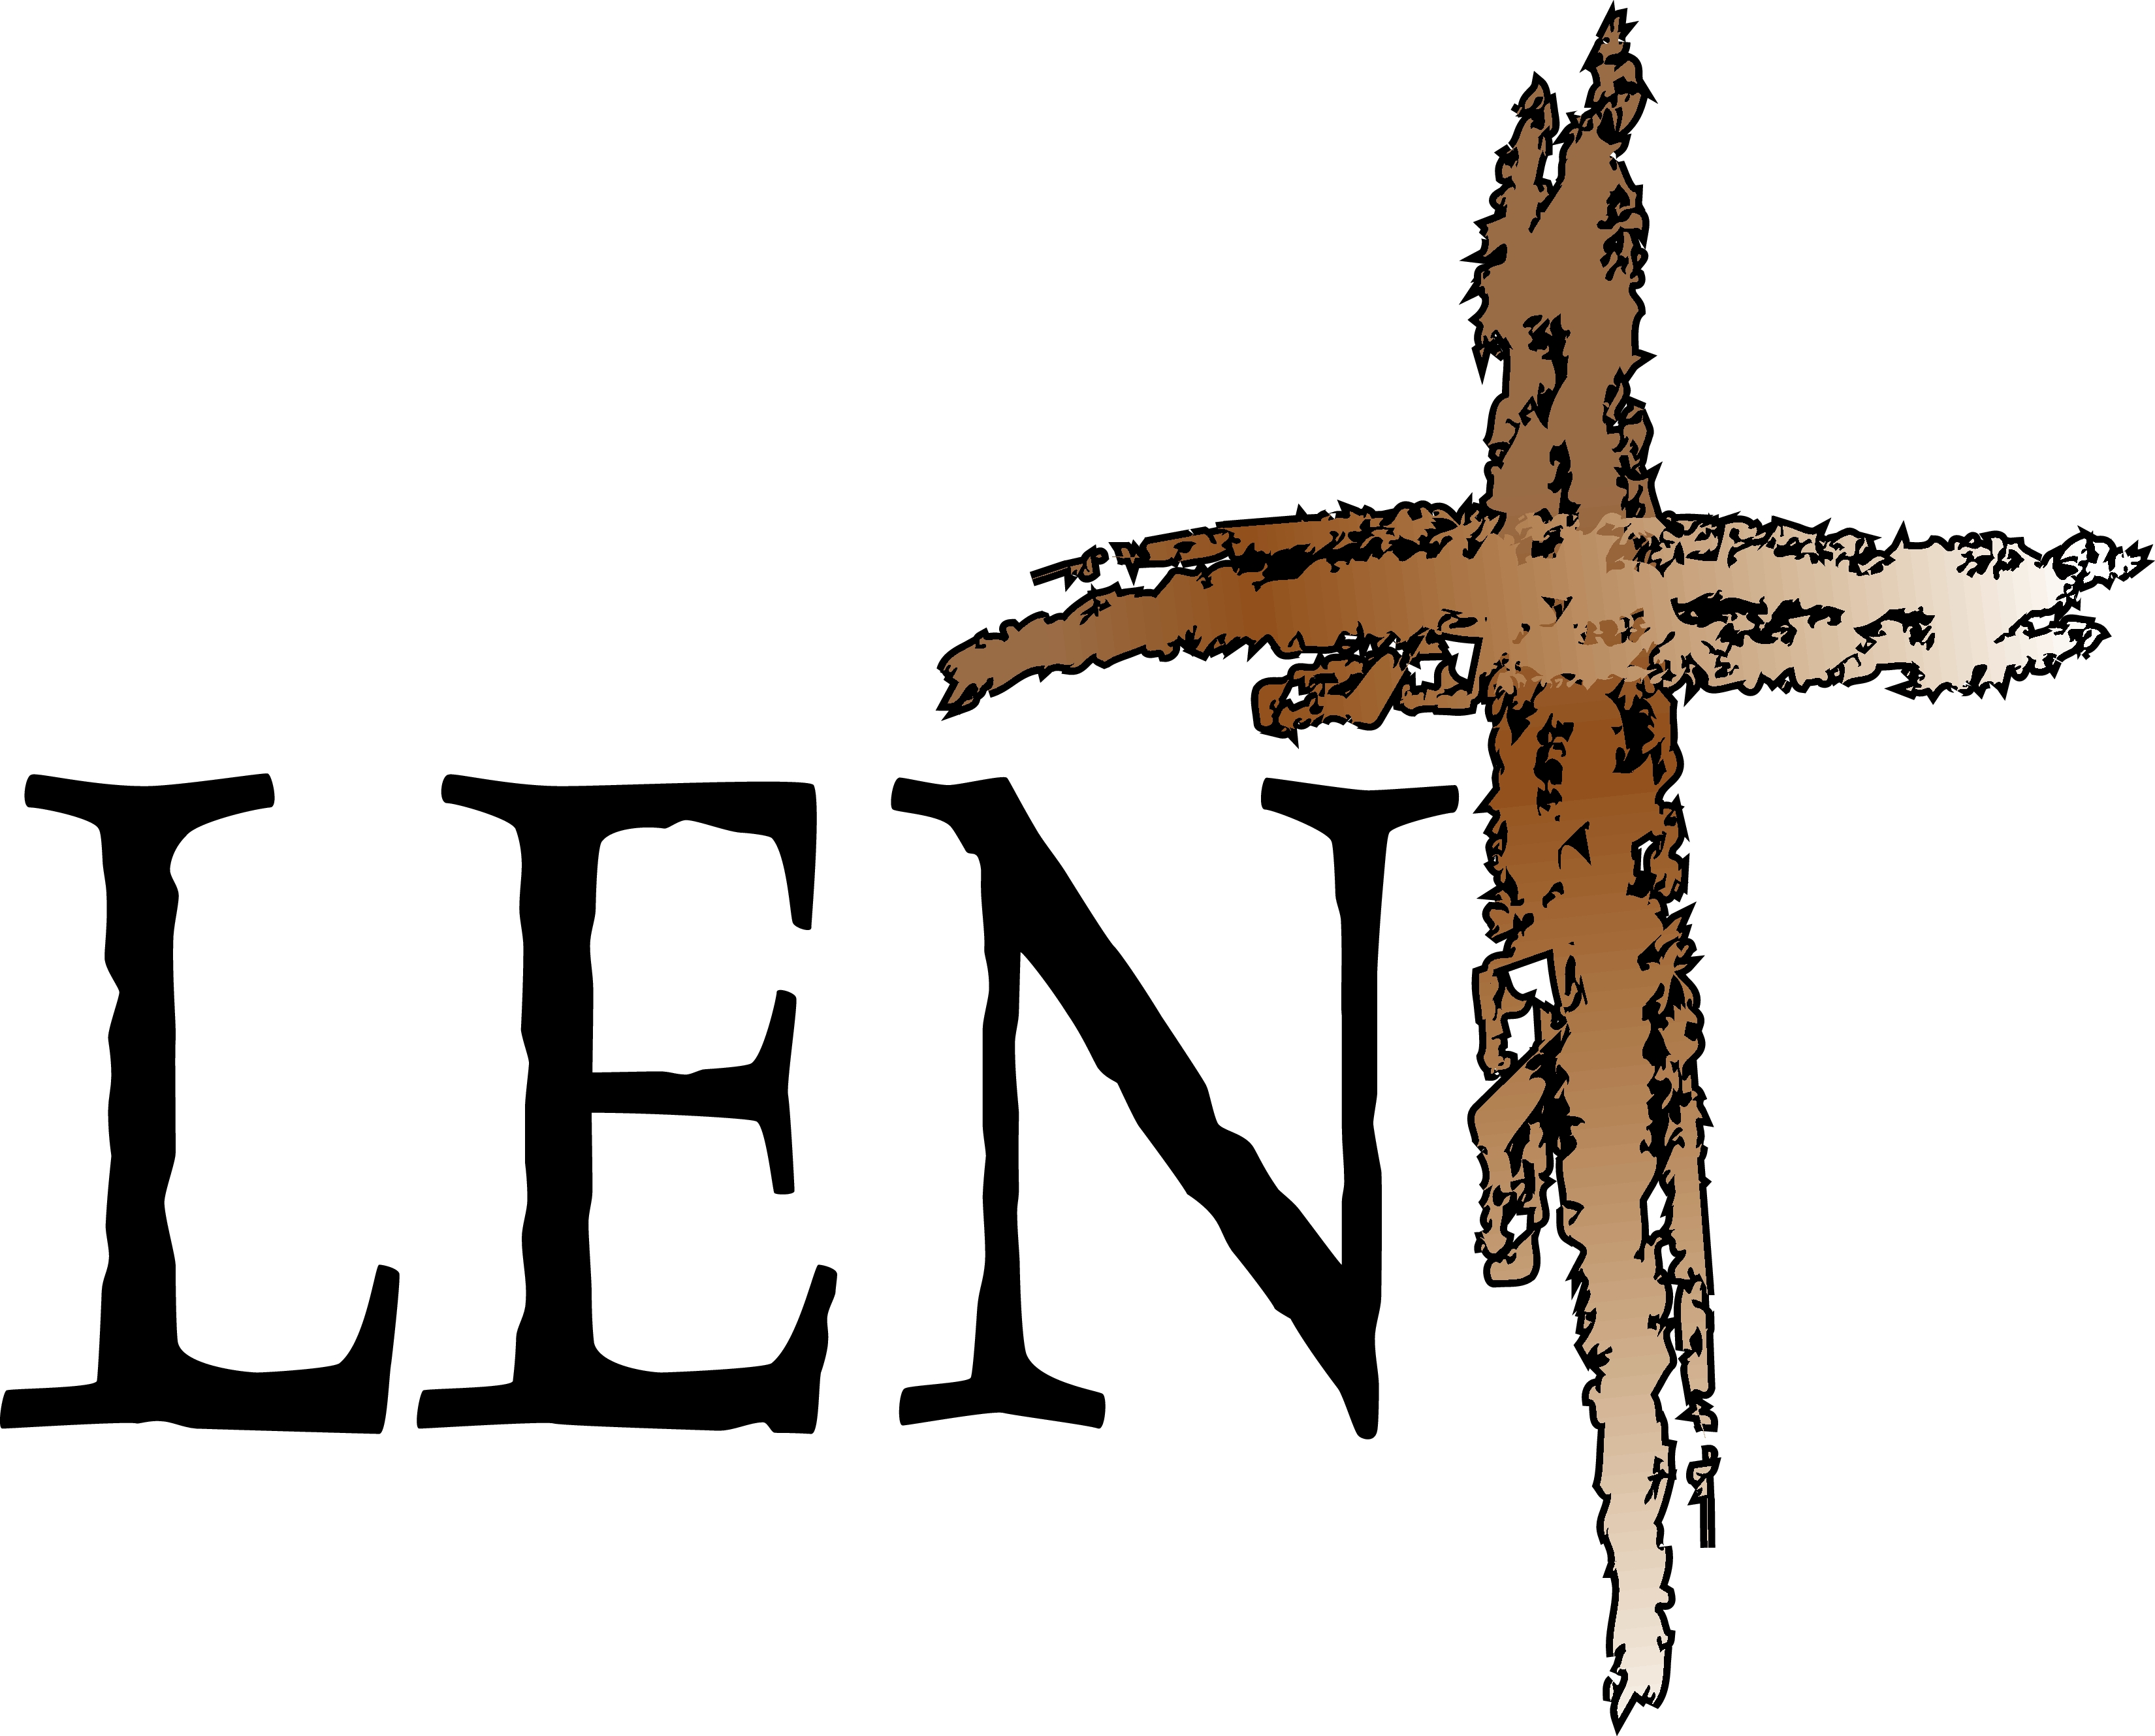 What should we give up for Lent?